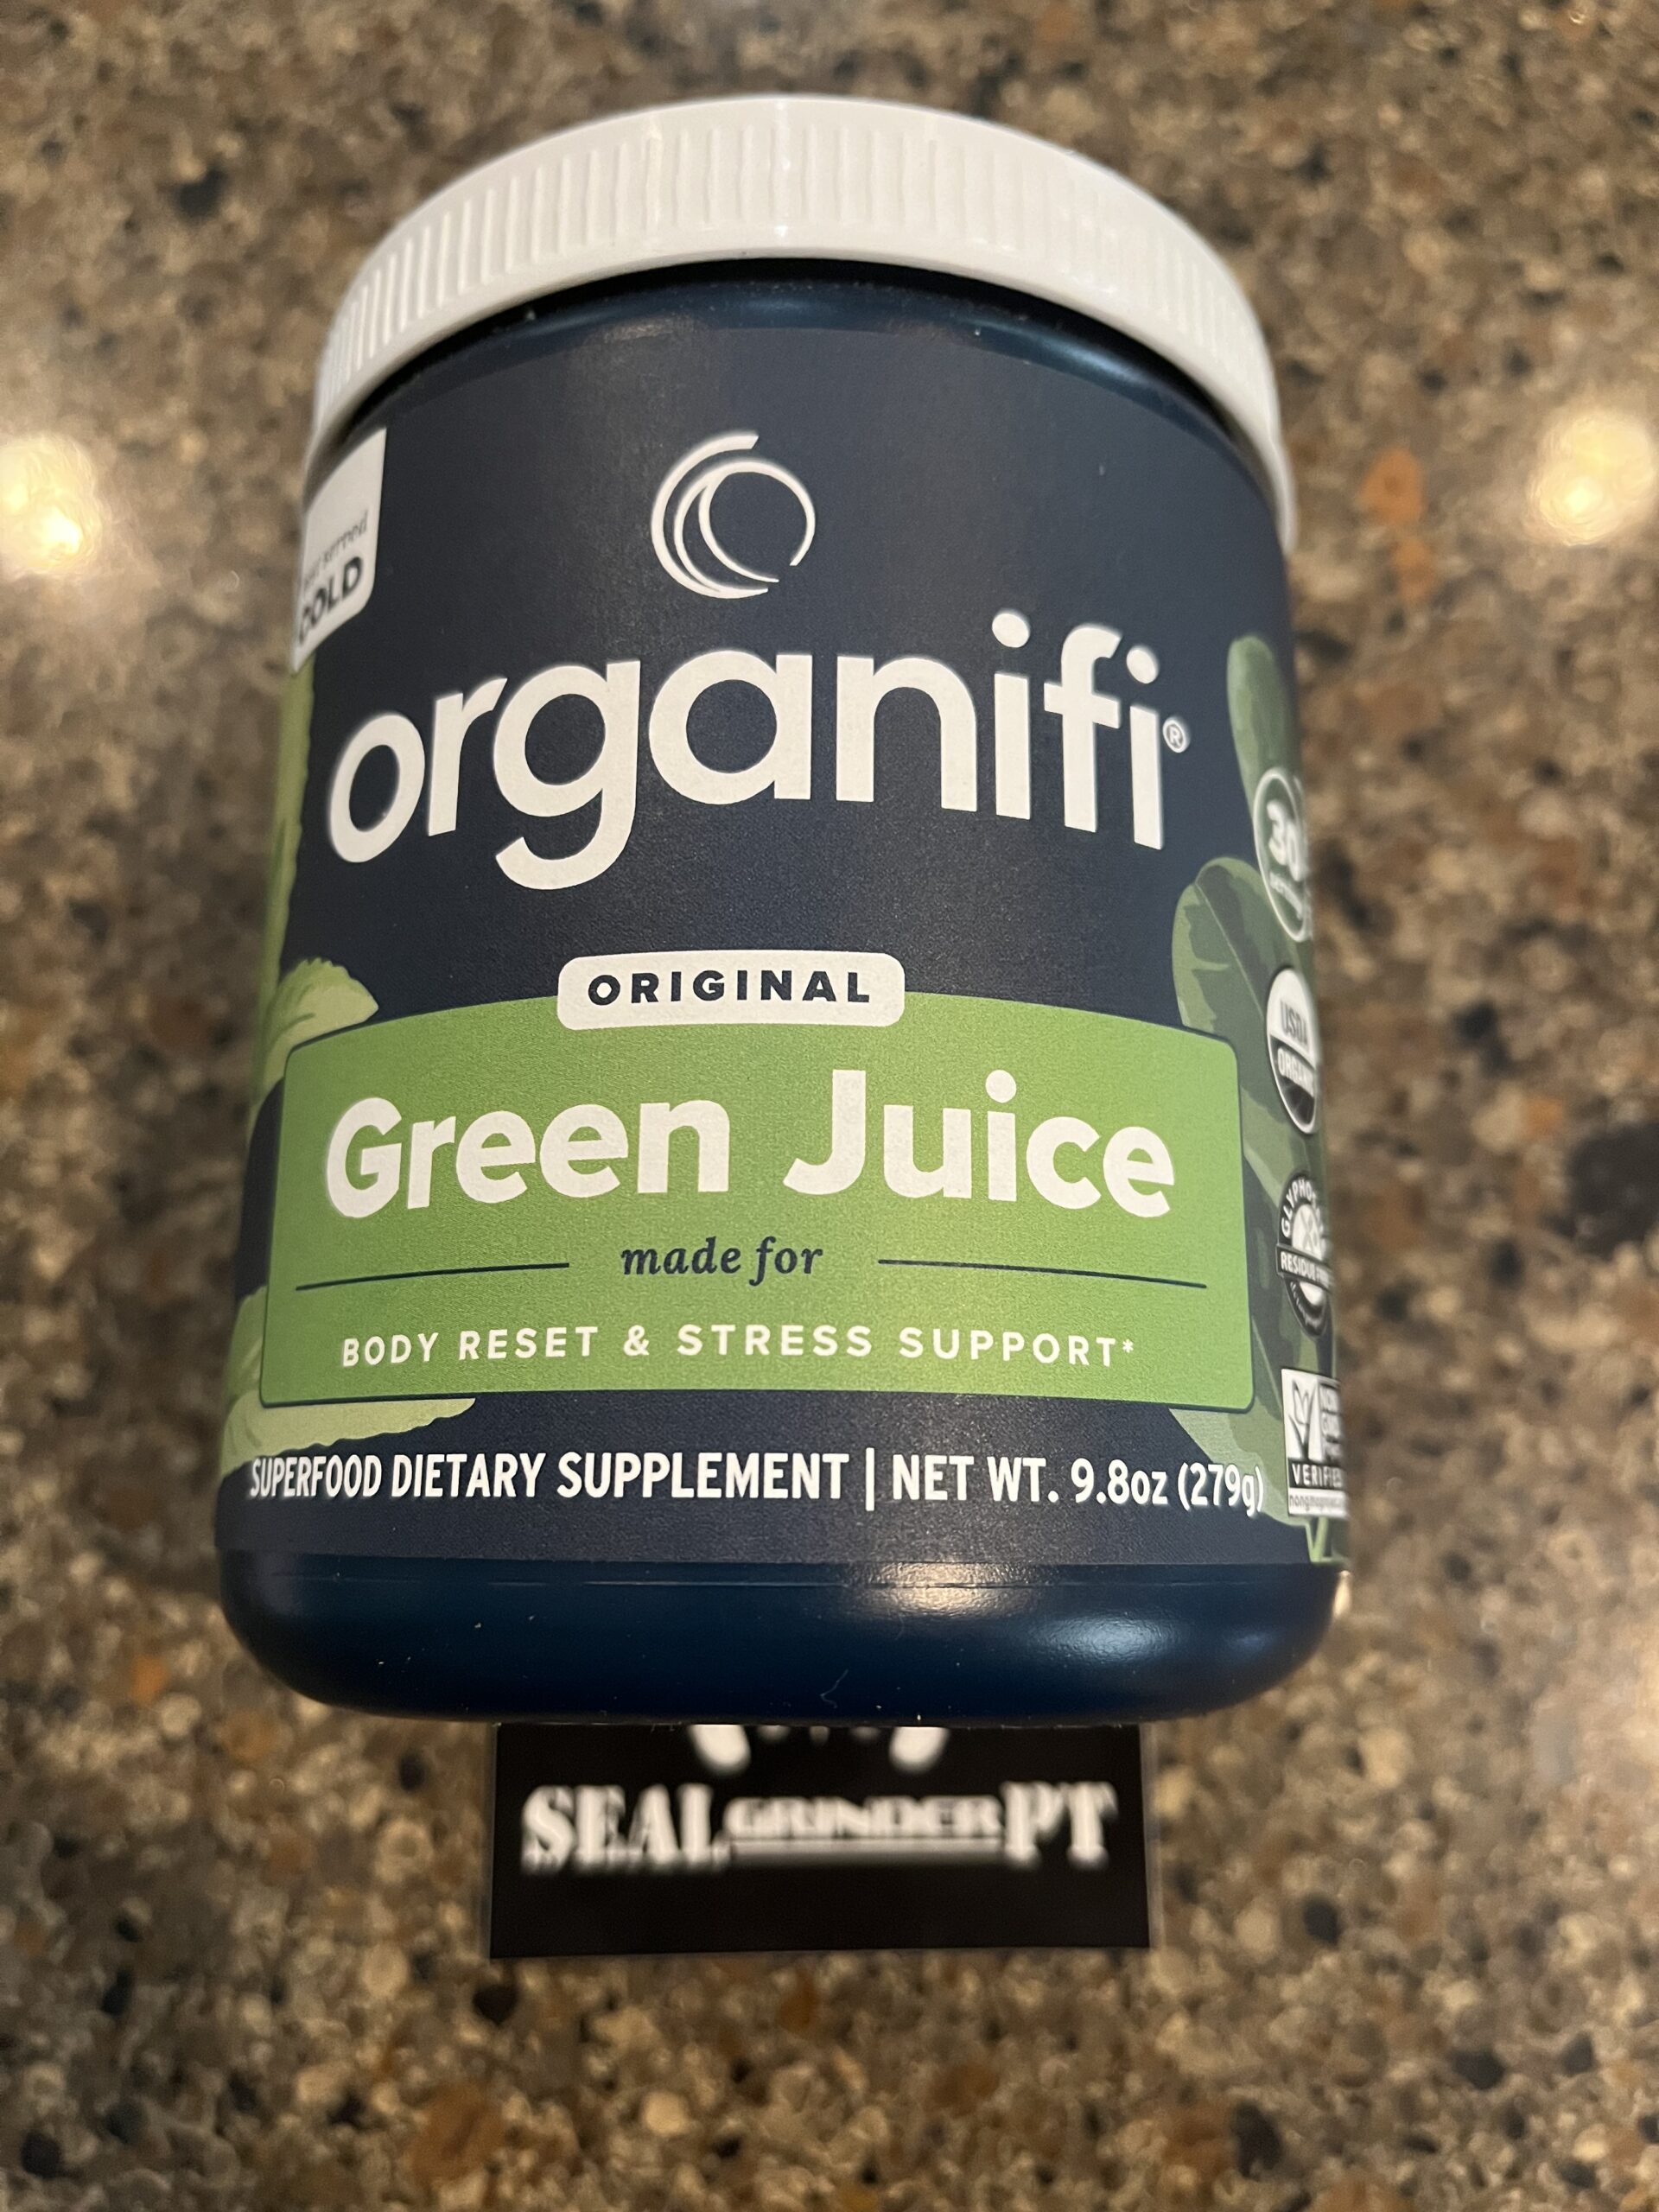 Featured image for “Organifi Green Juice Review”